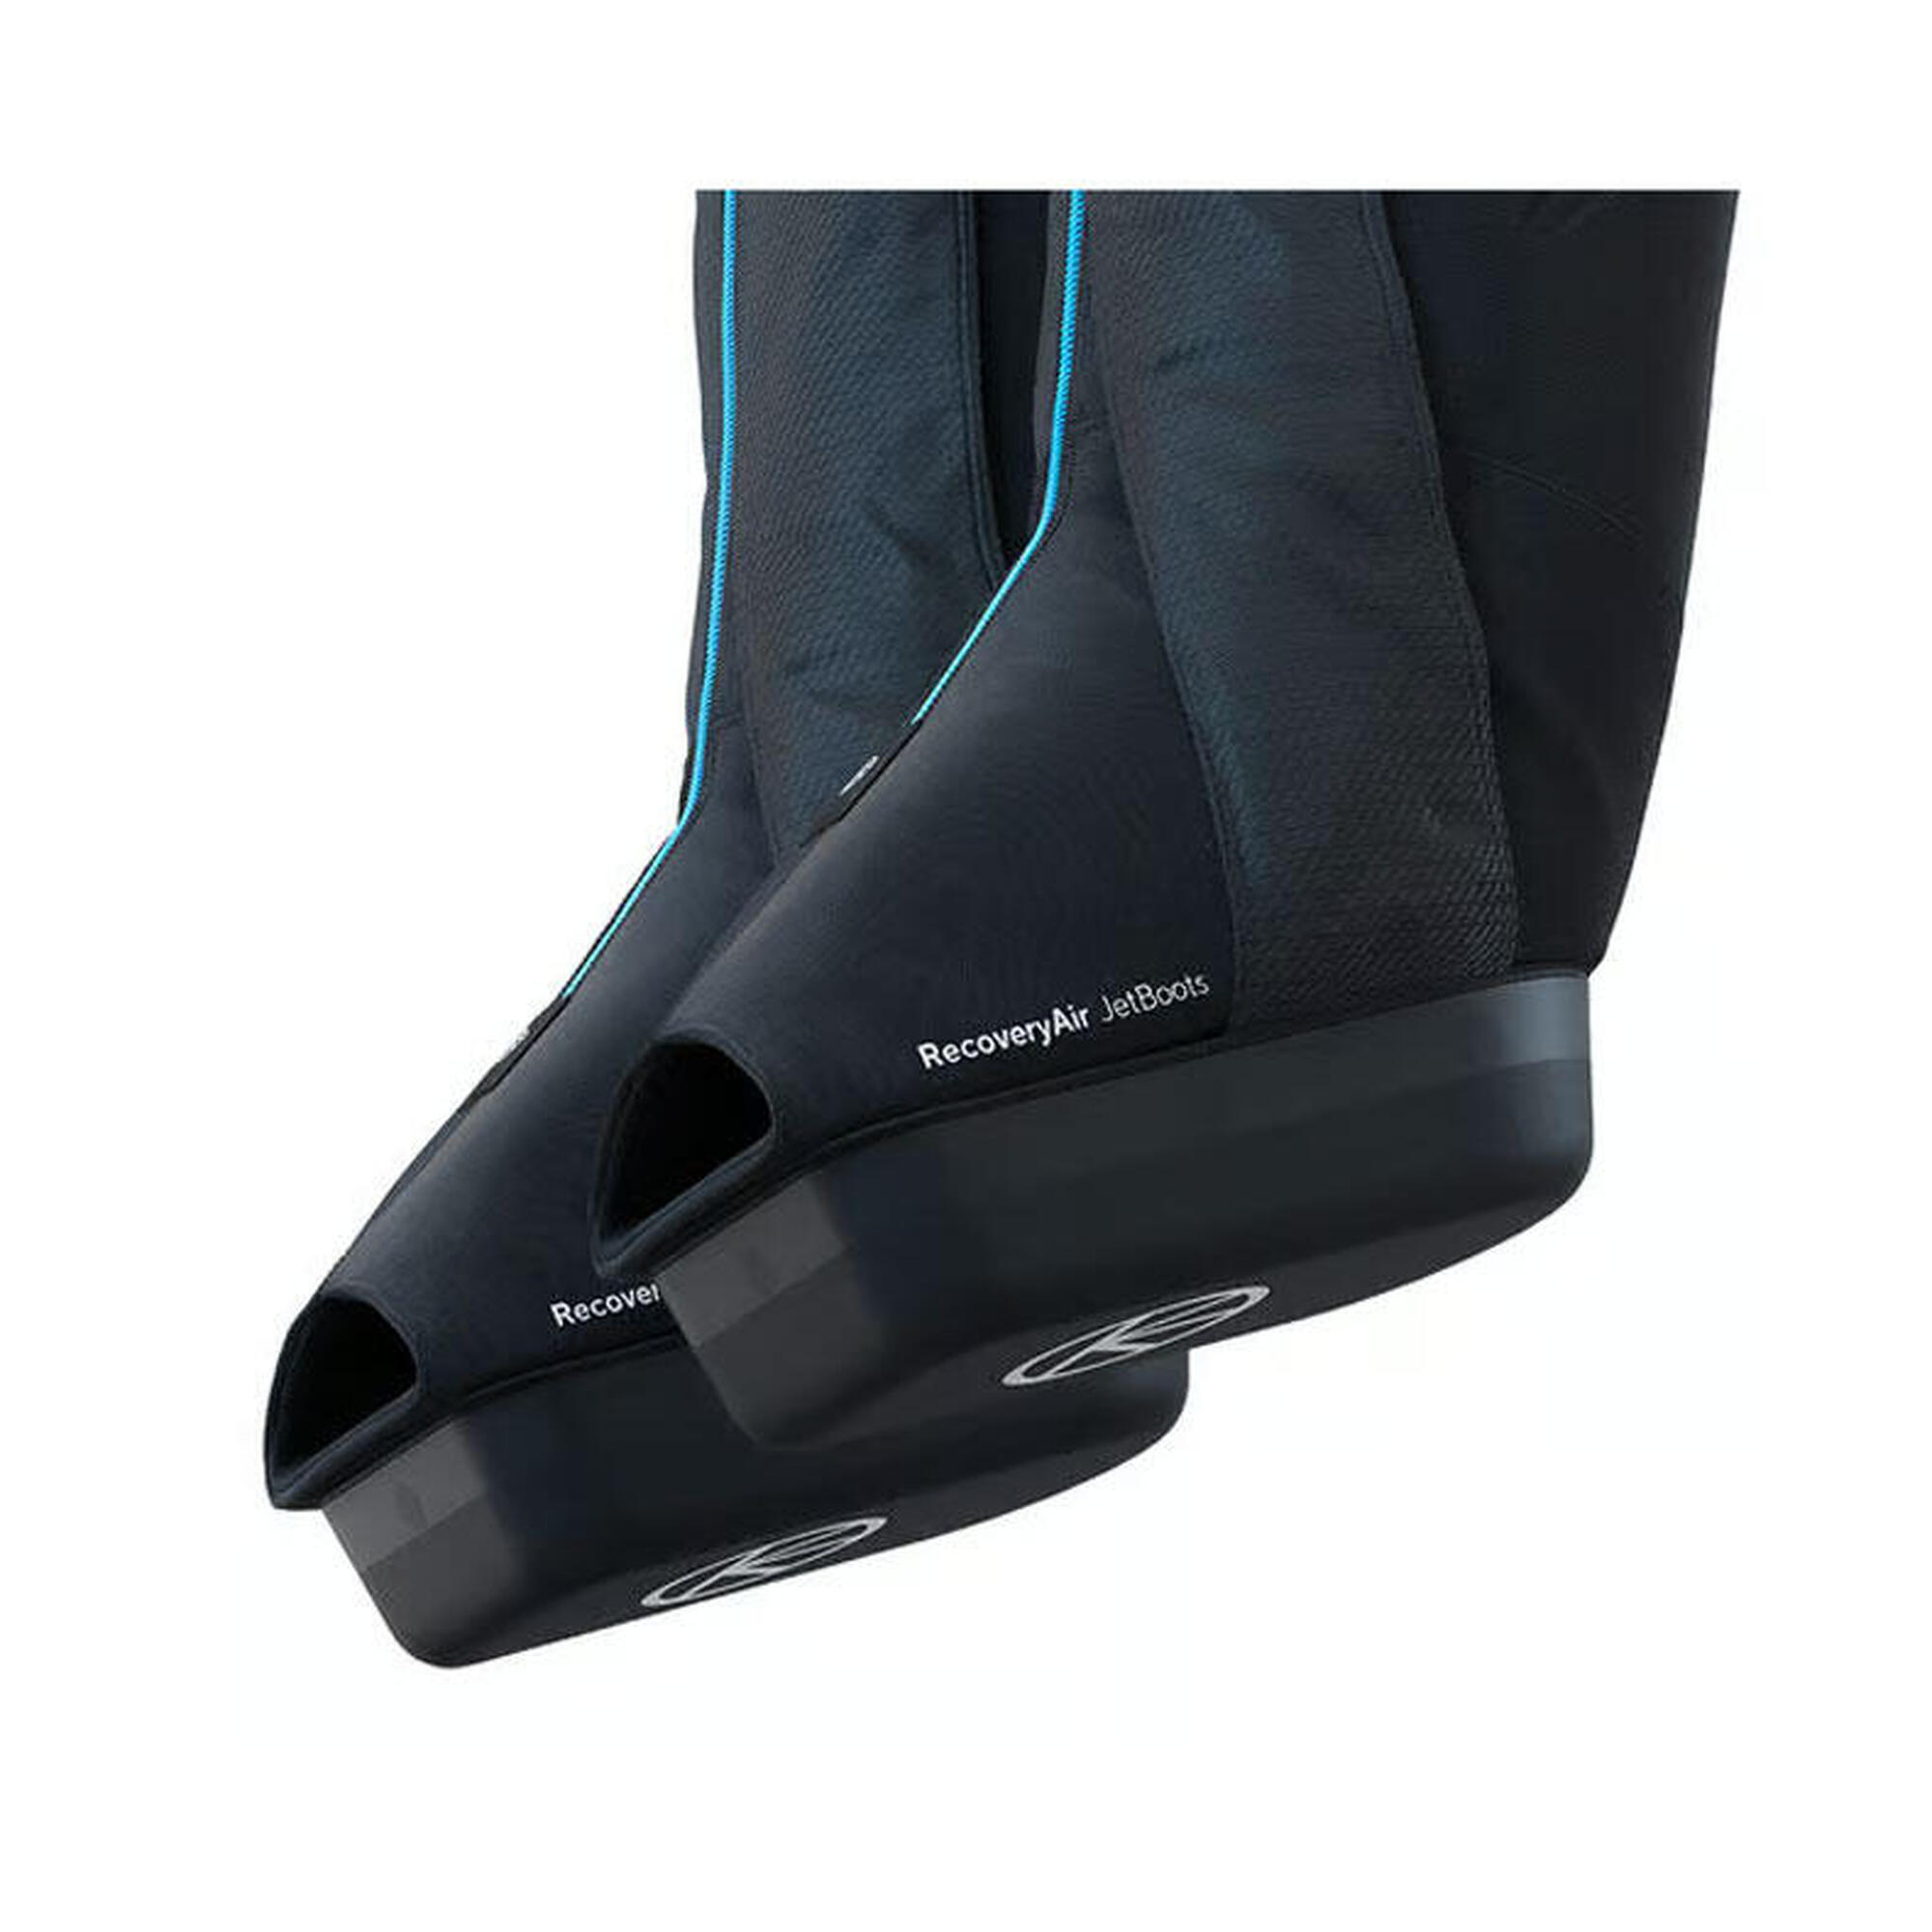 Therabody RecoveryAir JetBoots - M